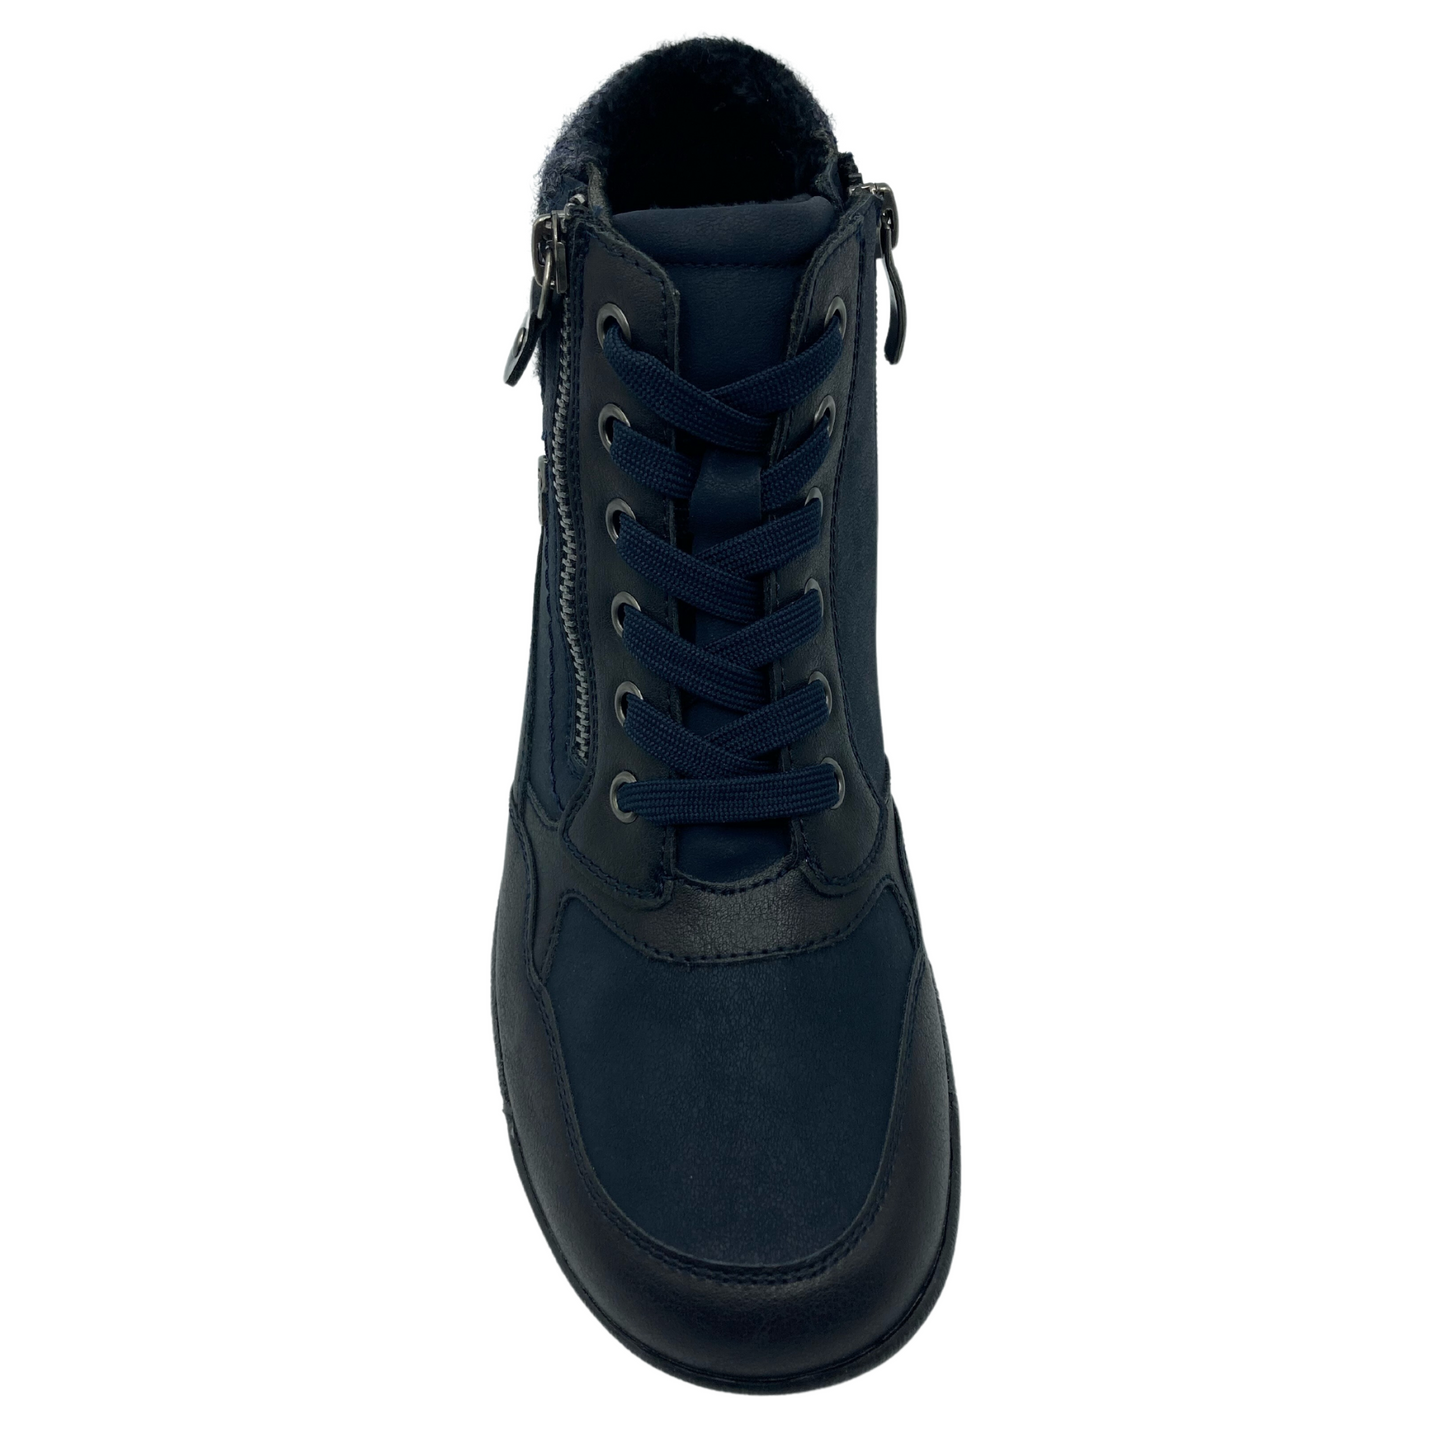 Top view of navy vegan suede and leather ankle boot with blue laces and double zip closure